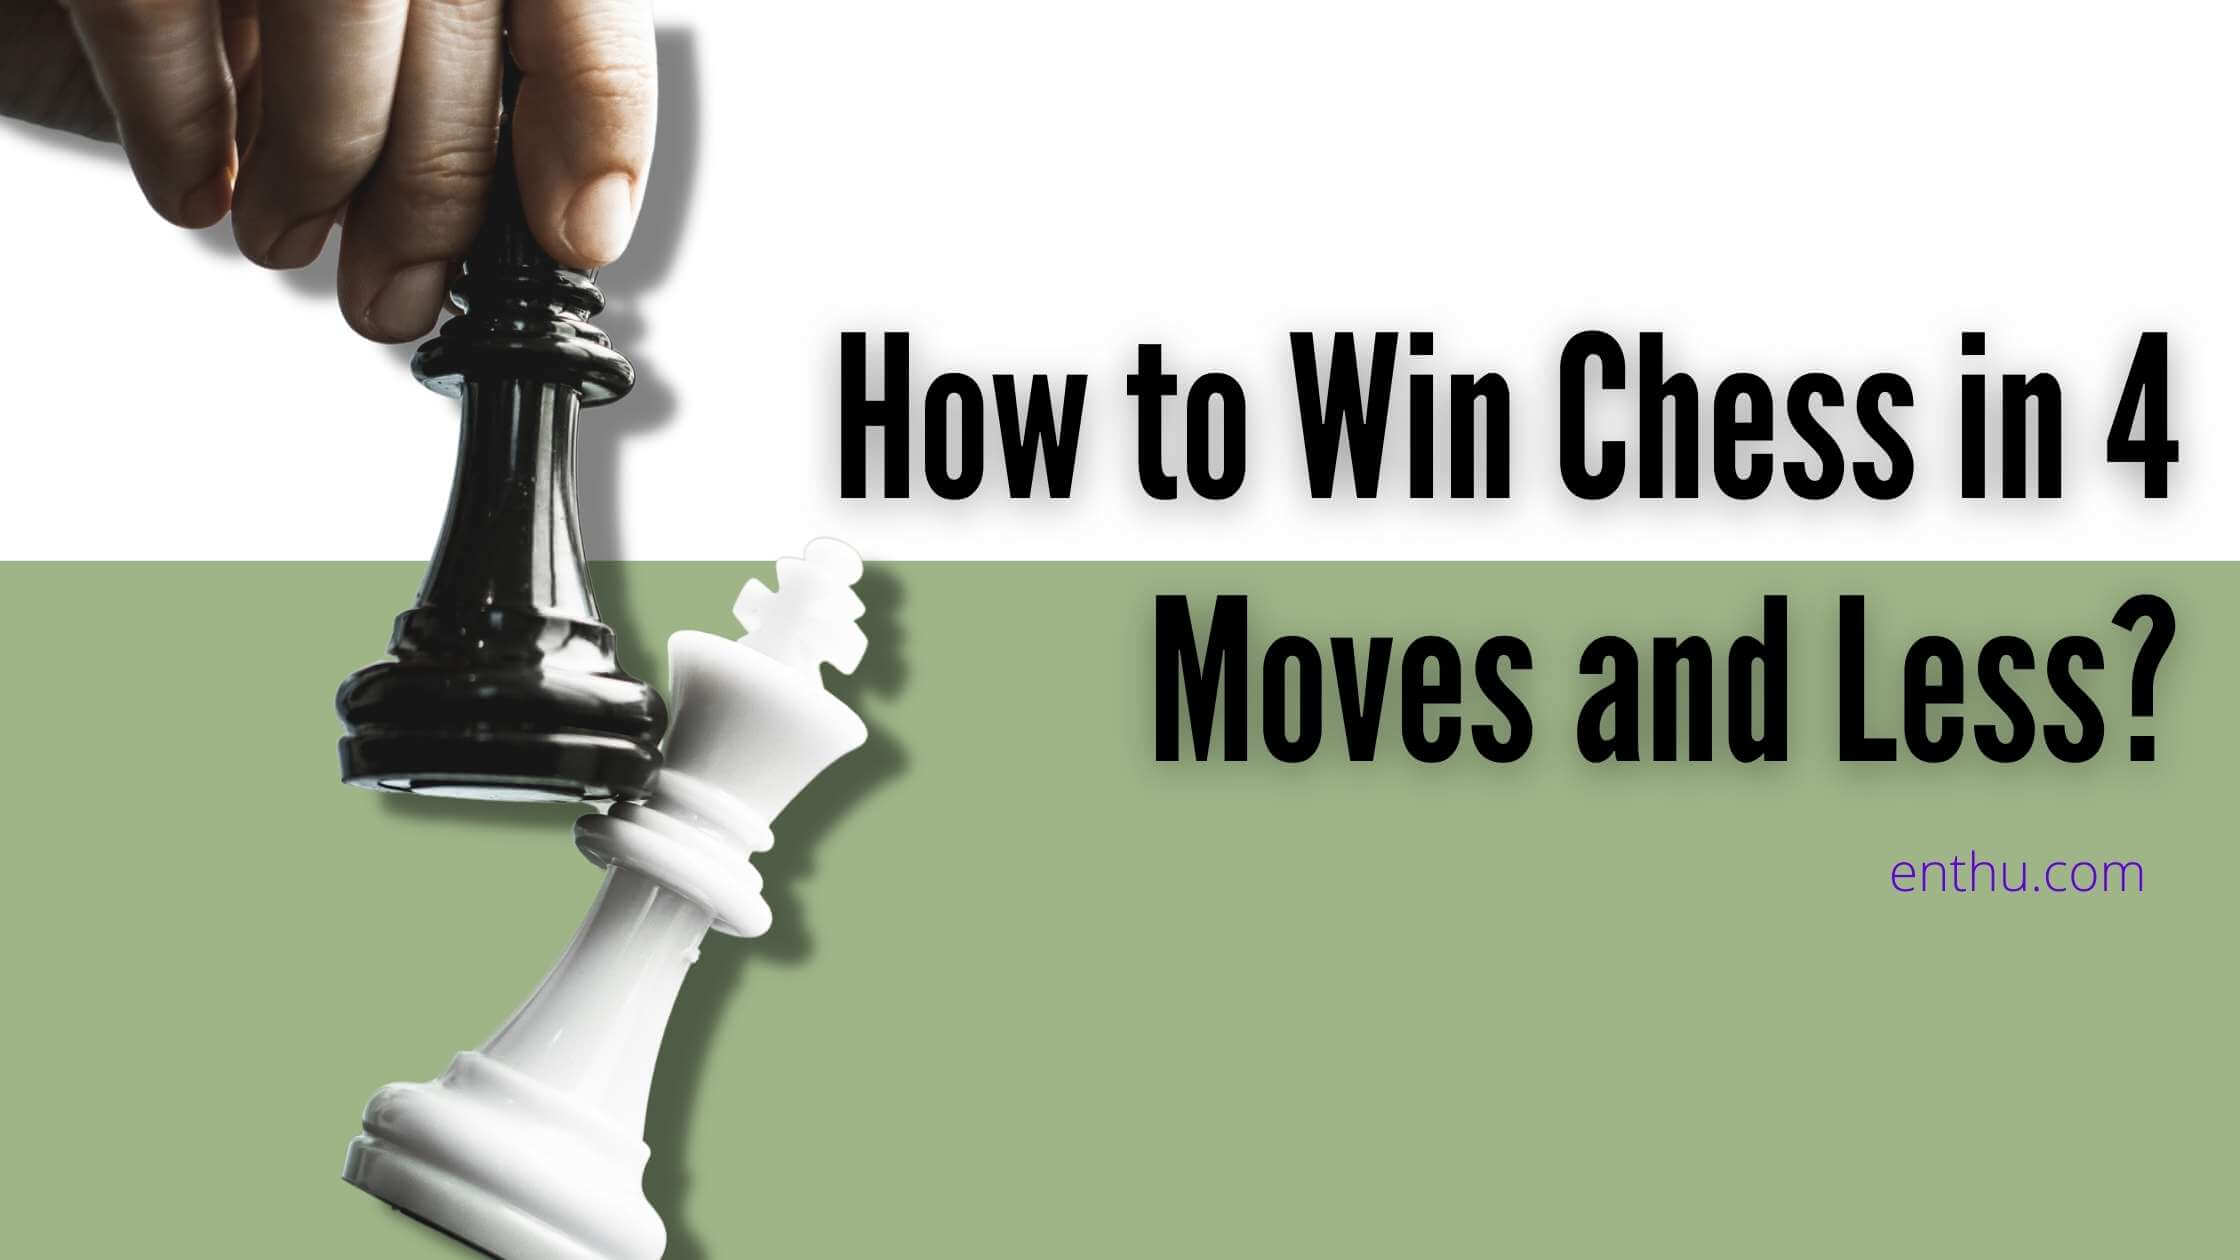 4 move checkmate in chess